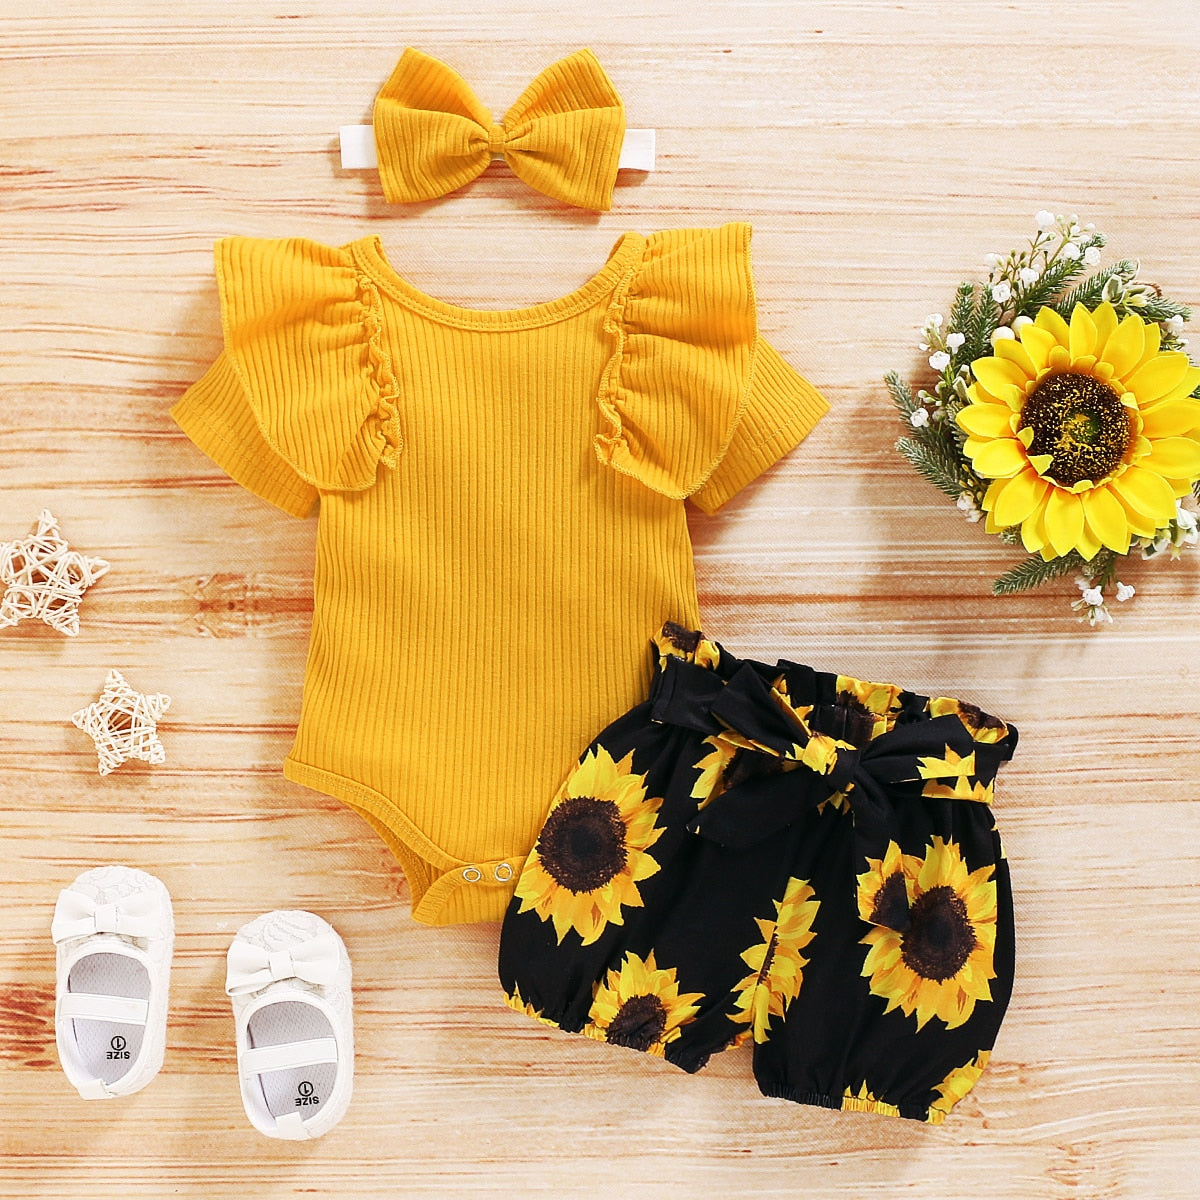 Lioraitiin 0-24M Newborn Infant Baby Girl Clothing Set Short Sleeve Yellow Solid Romper Top Sumflower Printed Shorts 3Pcs Outfit